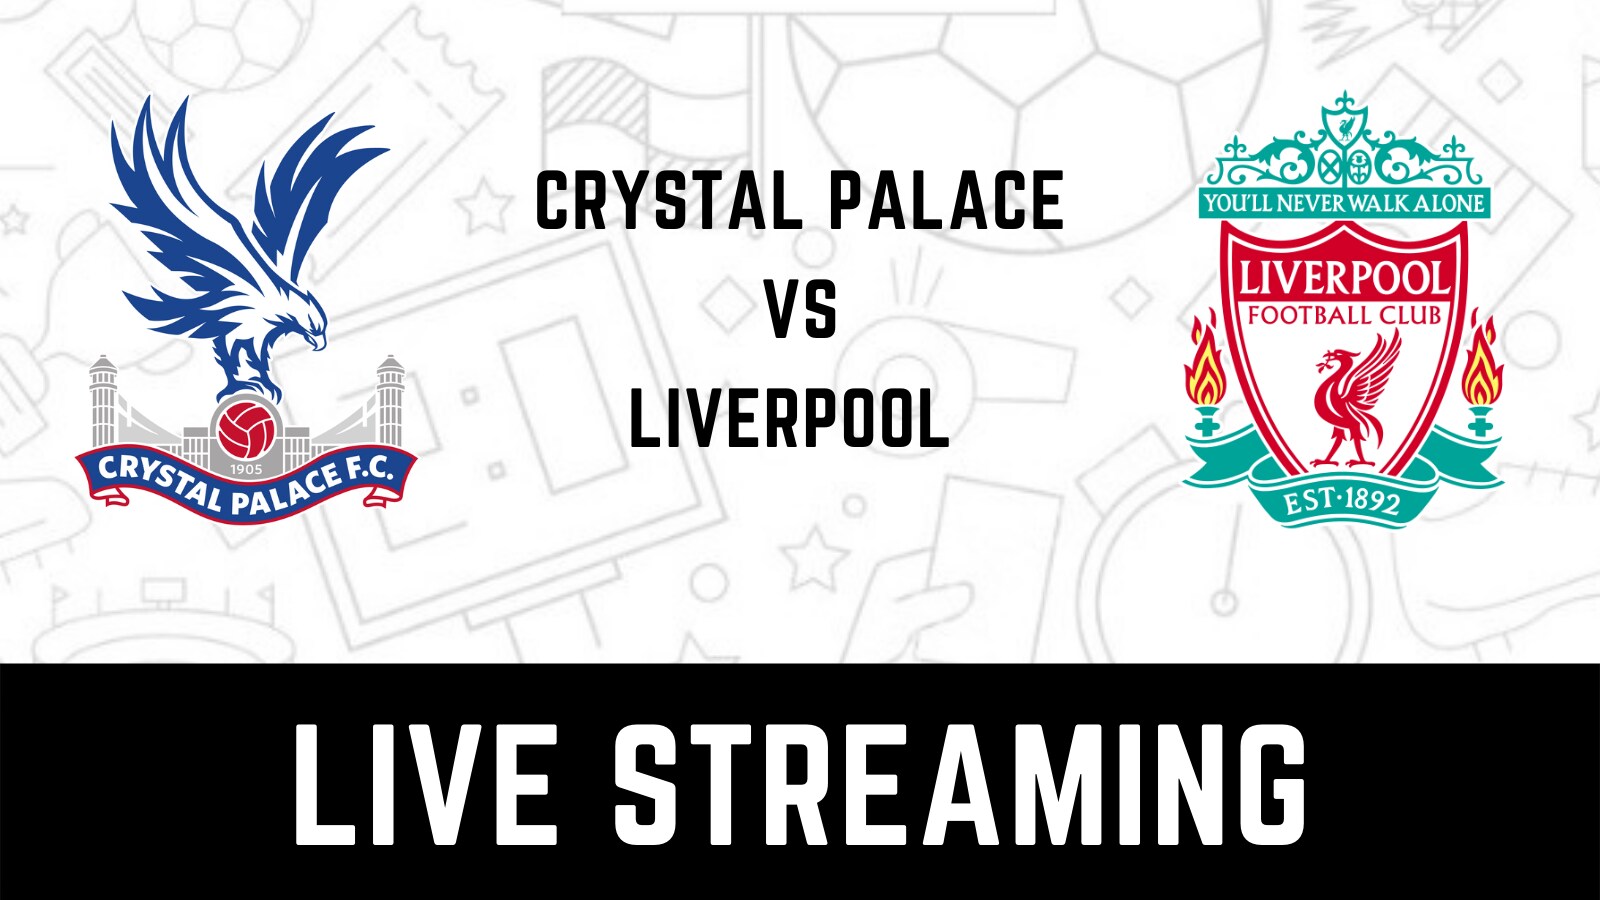 Crystal Palace vs Liverpool Live Streaming When and Where to Watch the Premier League Match